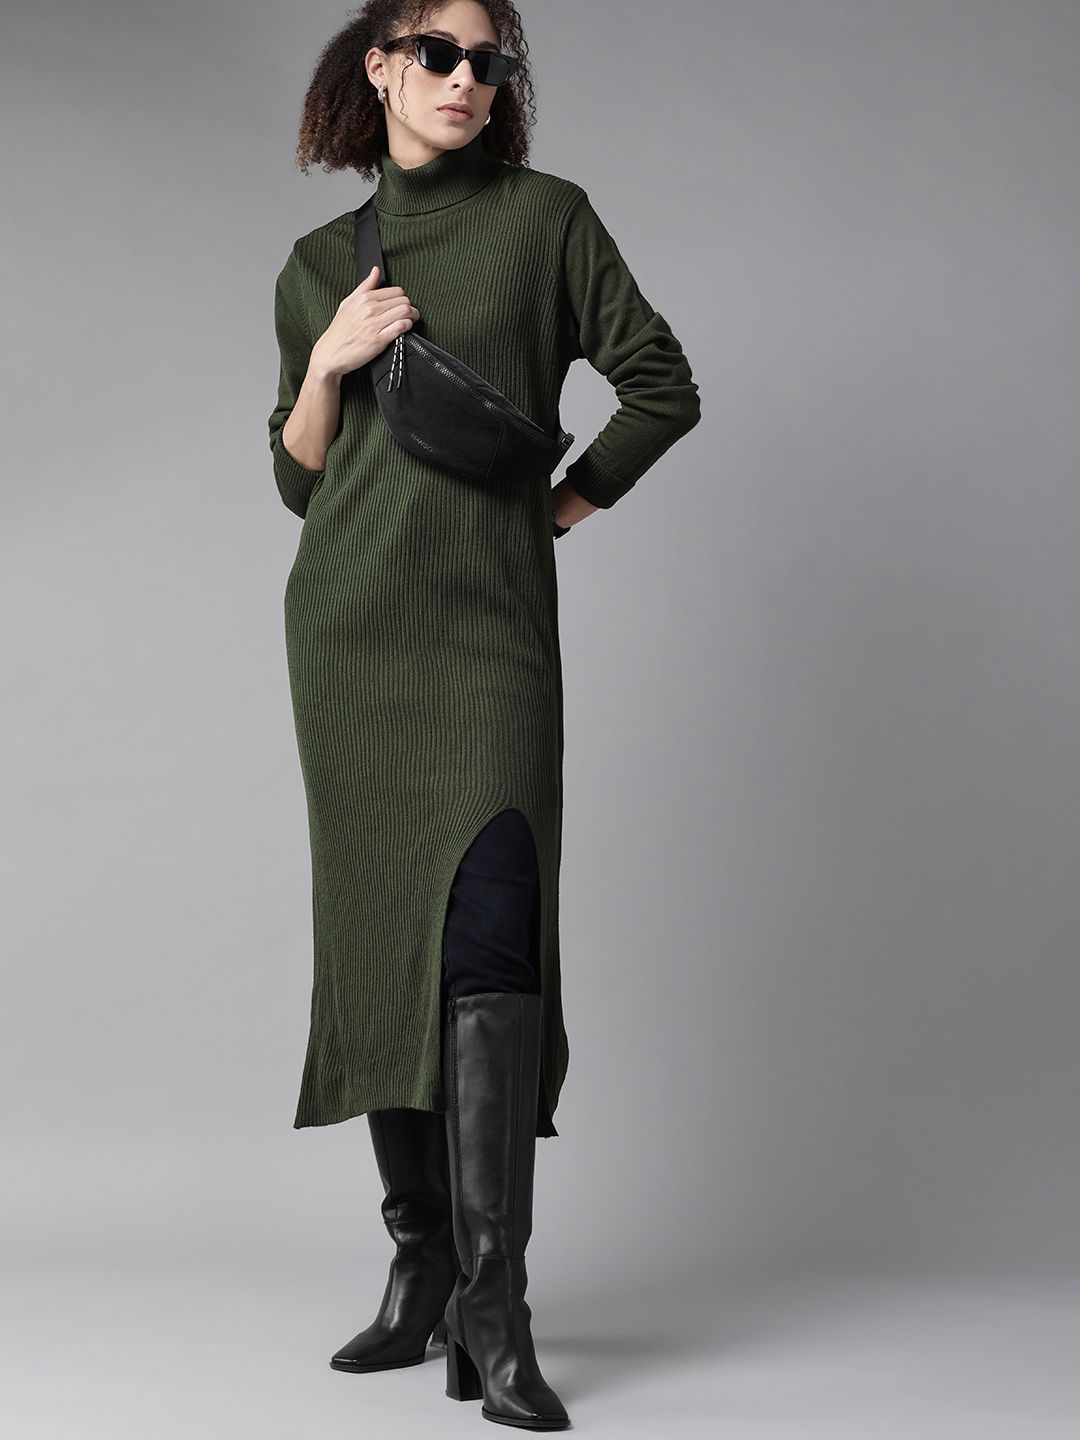 Roadster Women Olive Green Self-Striped Turtle Neck Longline Pullover with Slit Price in India